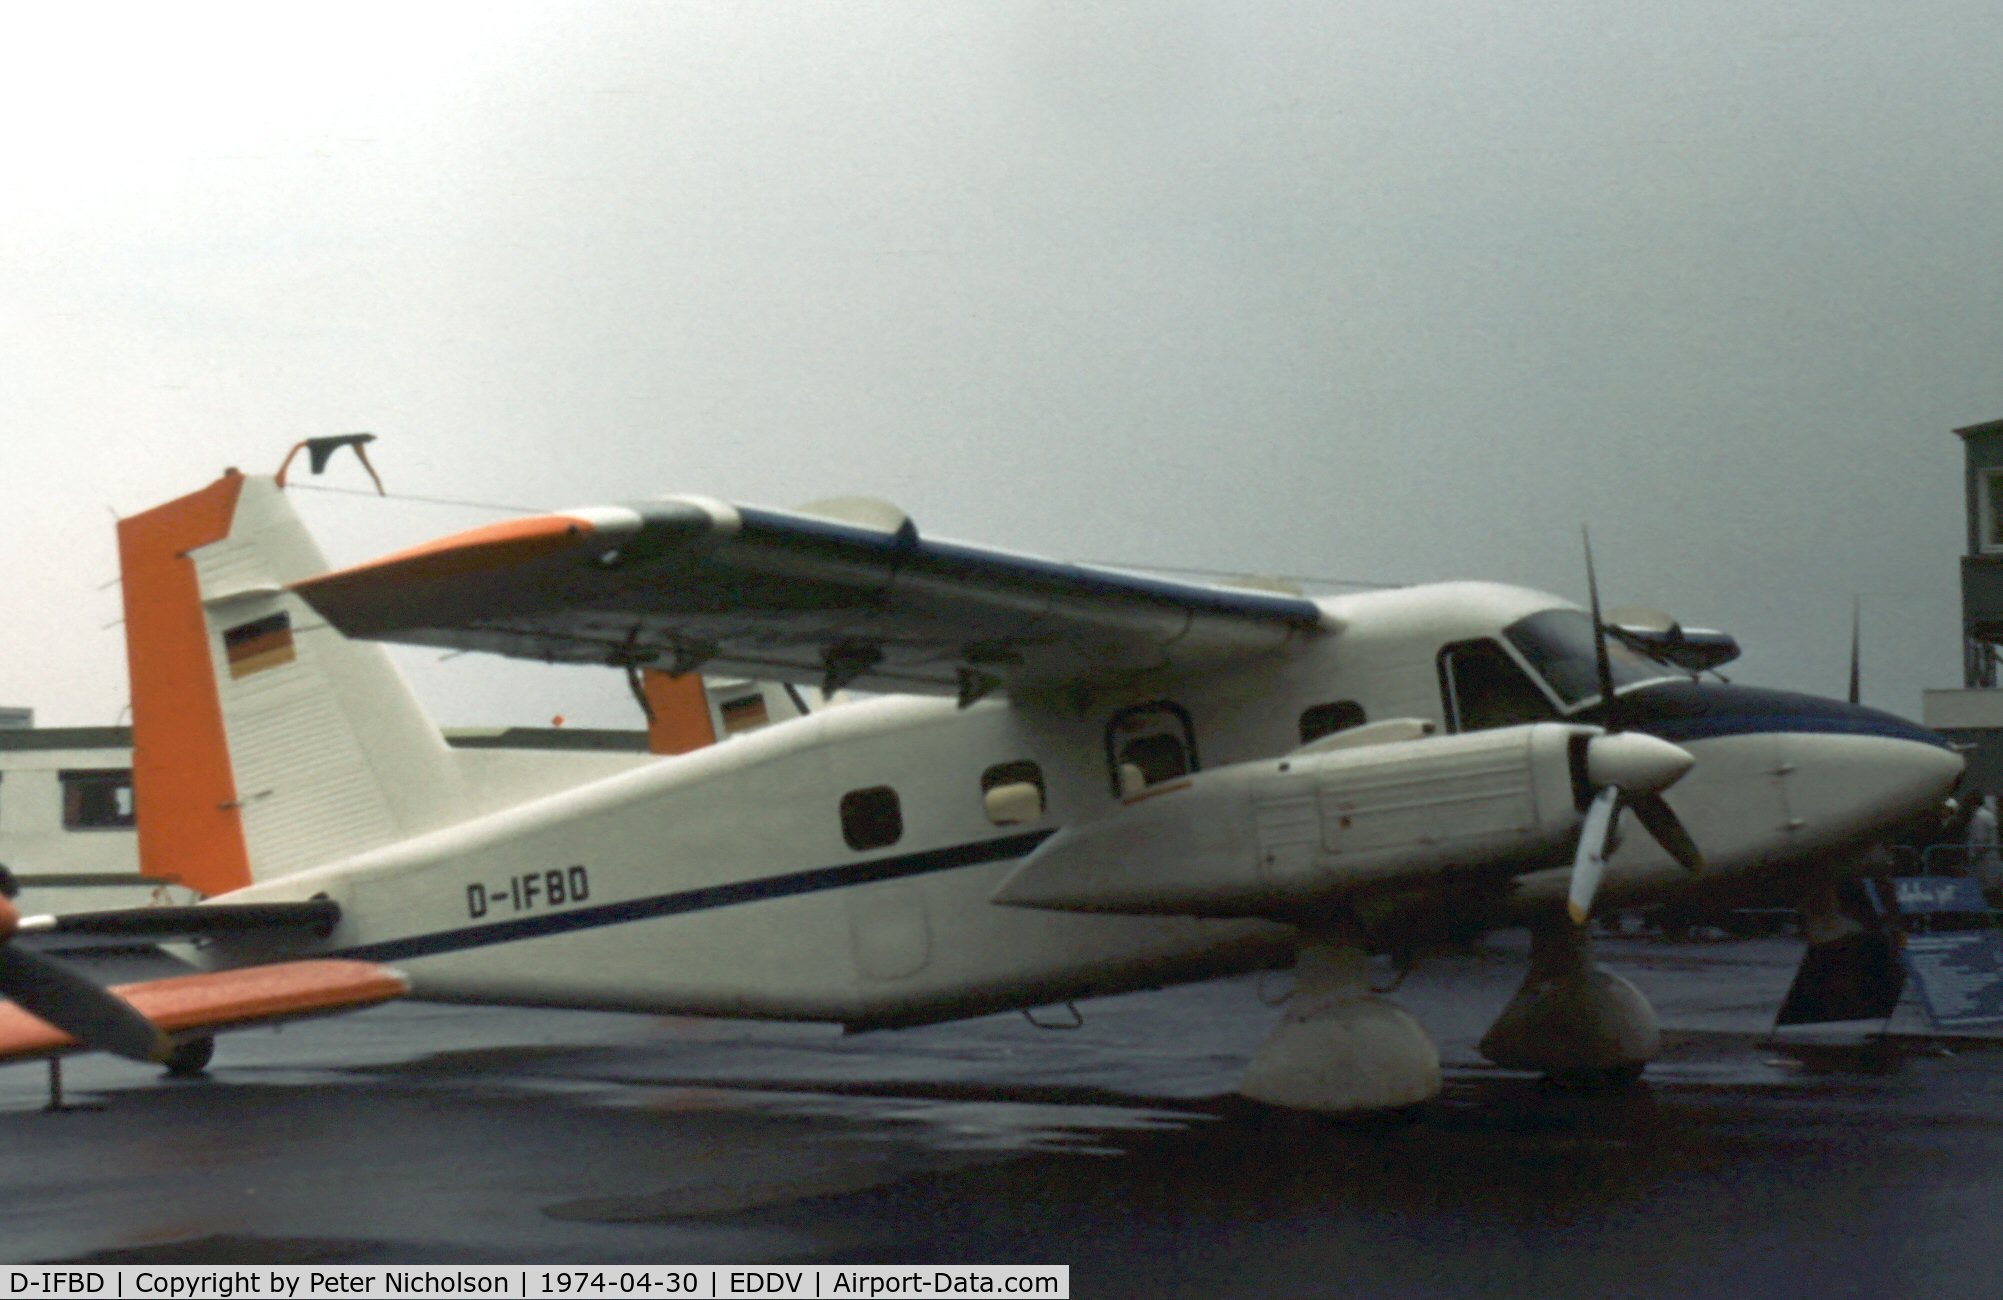 D-IFBD, 1974 Dornier Do-28D-1 Skyservant C/N 4038, Skyservant on display at the 1974 Hannover Airshow operated by the German Test & Research Institute - DFVLR.